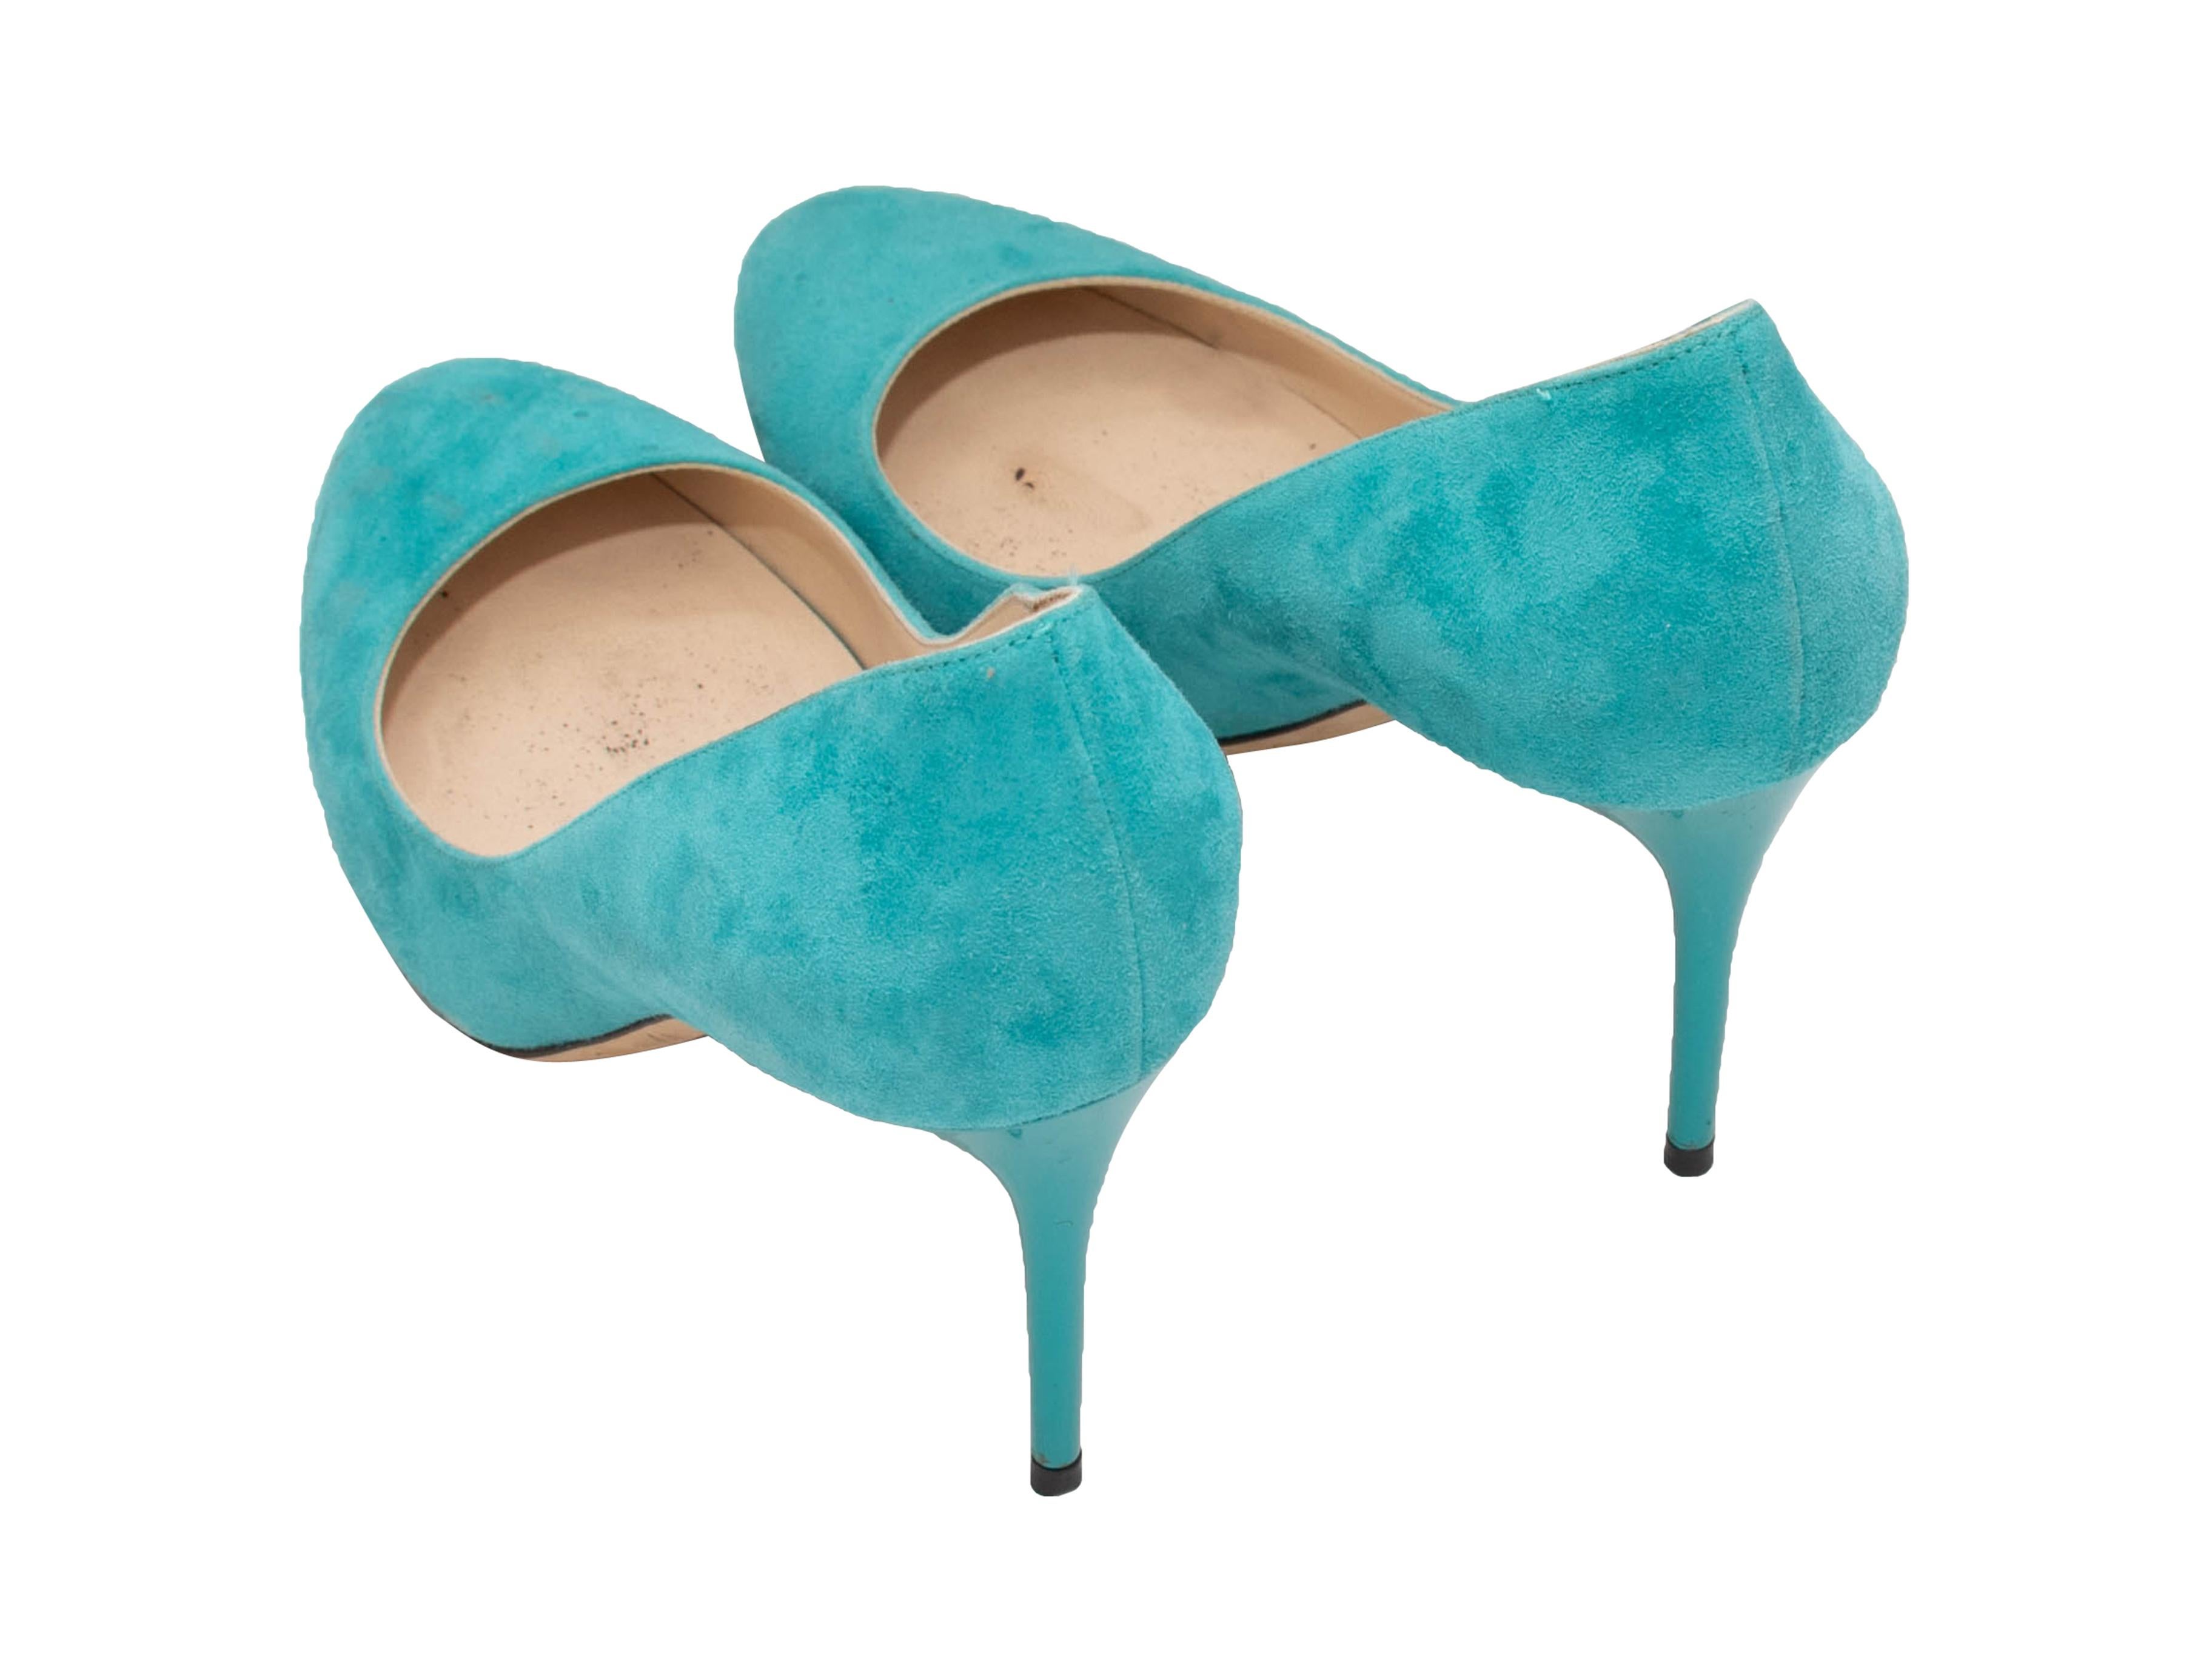 Turquoise Jimmy Choo Esme Suede Pumps Size 6.5 In Good Condition For Sale In New York, NY